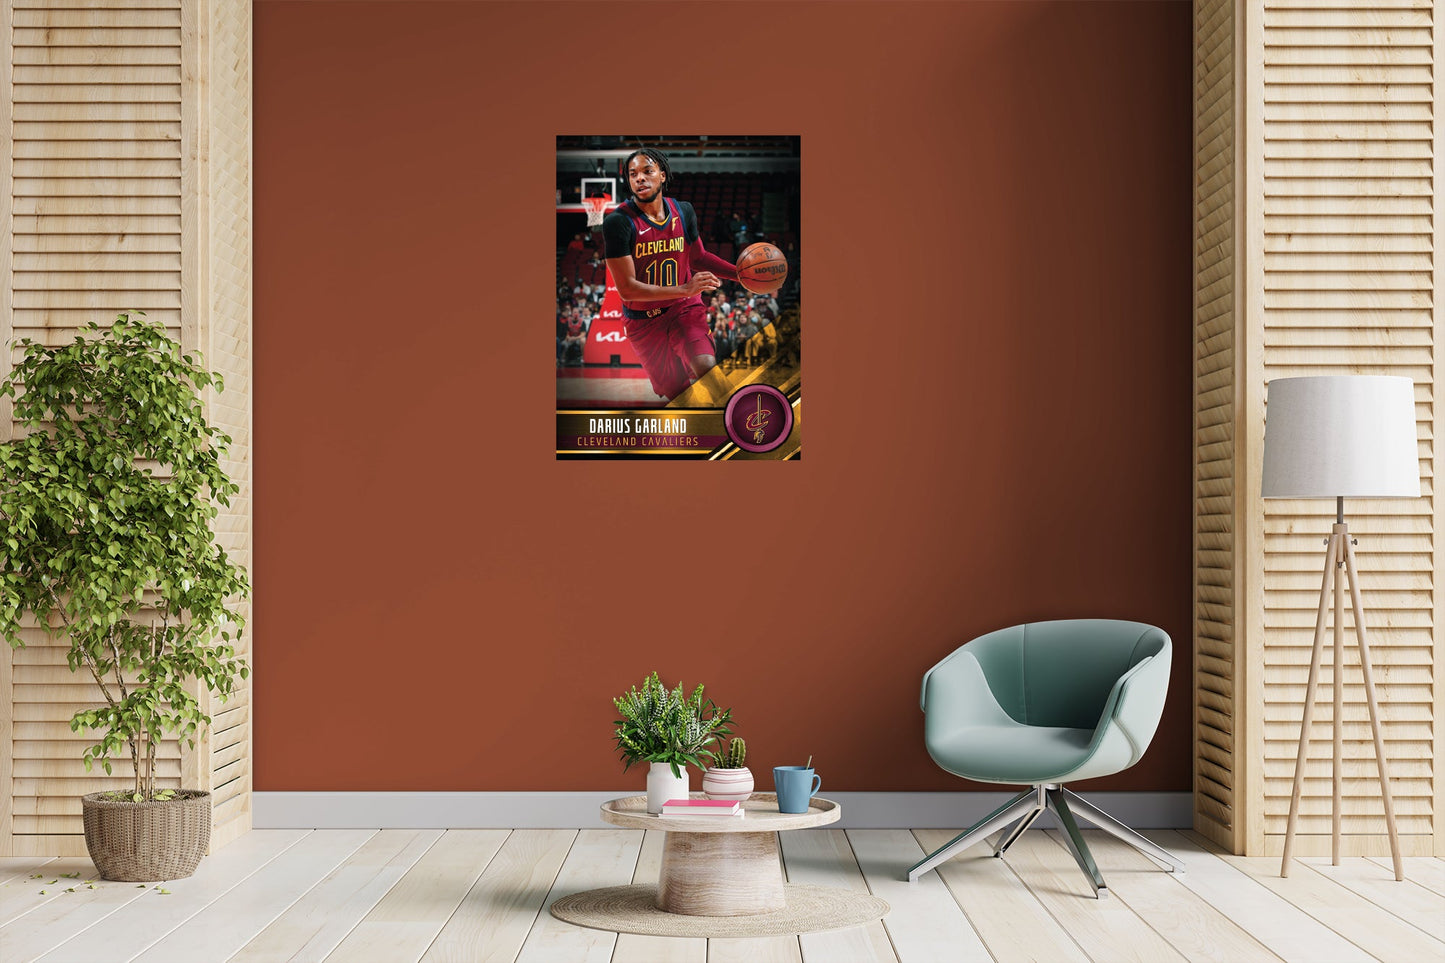 Cleveland Cavaliers: Darius Garland Poster - Officially Licensed NBA Removable Adhesive Decal